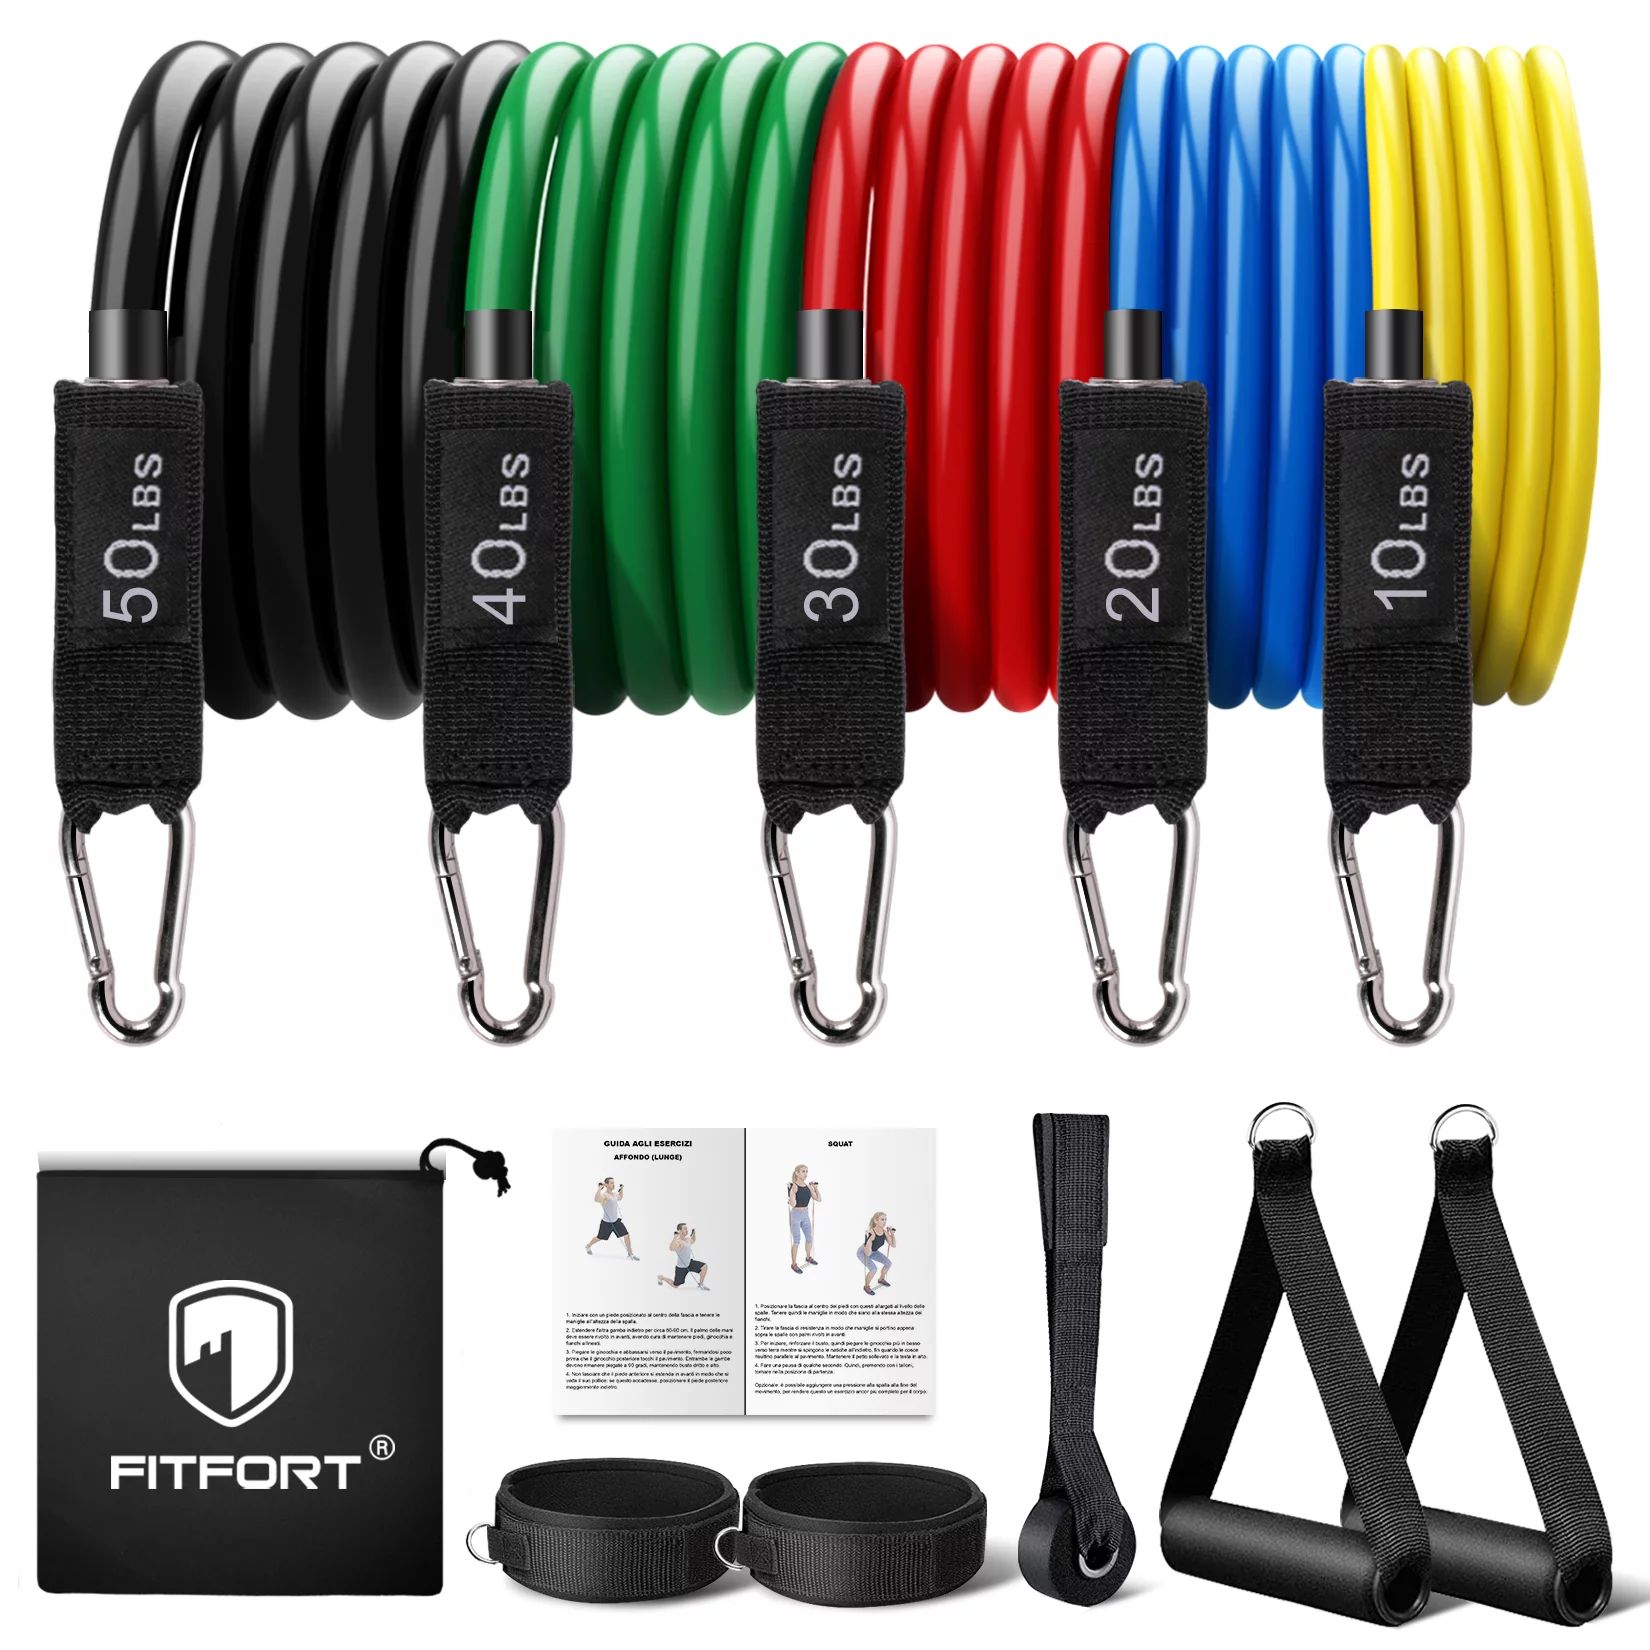 Fitfort Resistance Bands Exercise Bands Workout Bands with Handles up to 150 Lb. | Walmart (US)